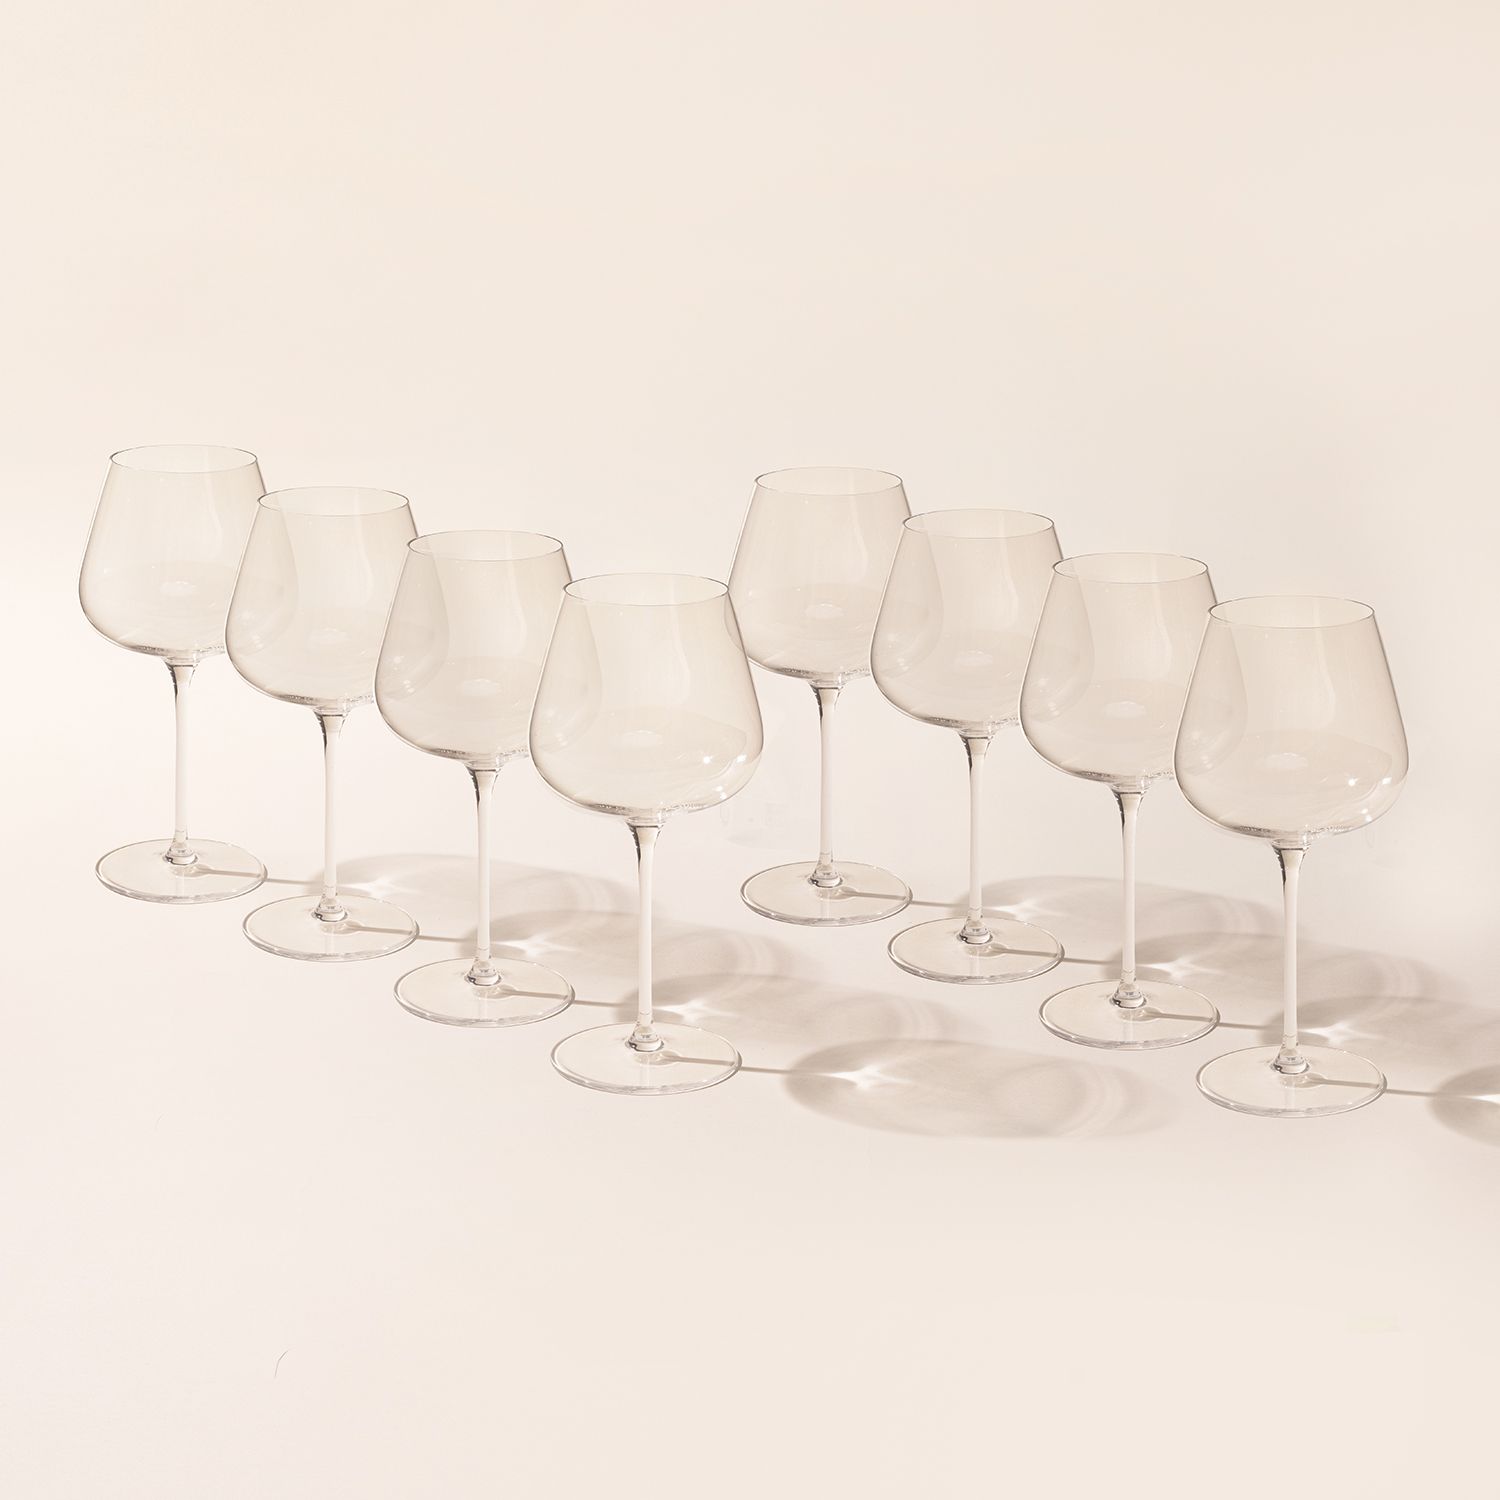 coccot Wine Glasses Set of 6,Crystal White Wine Glasses,Red Wine